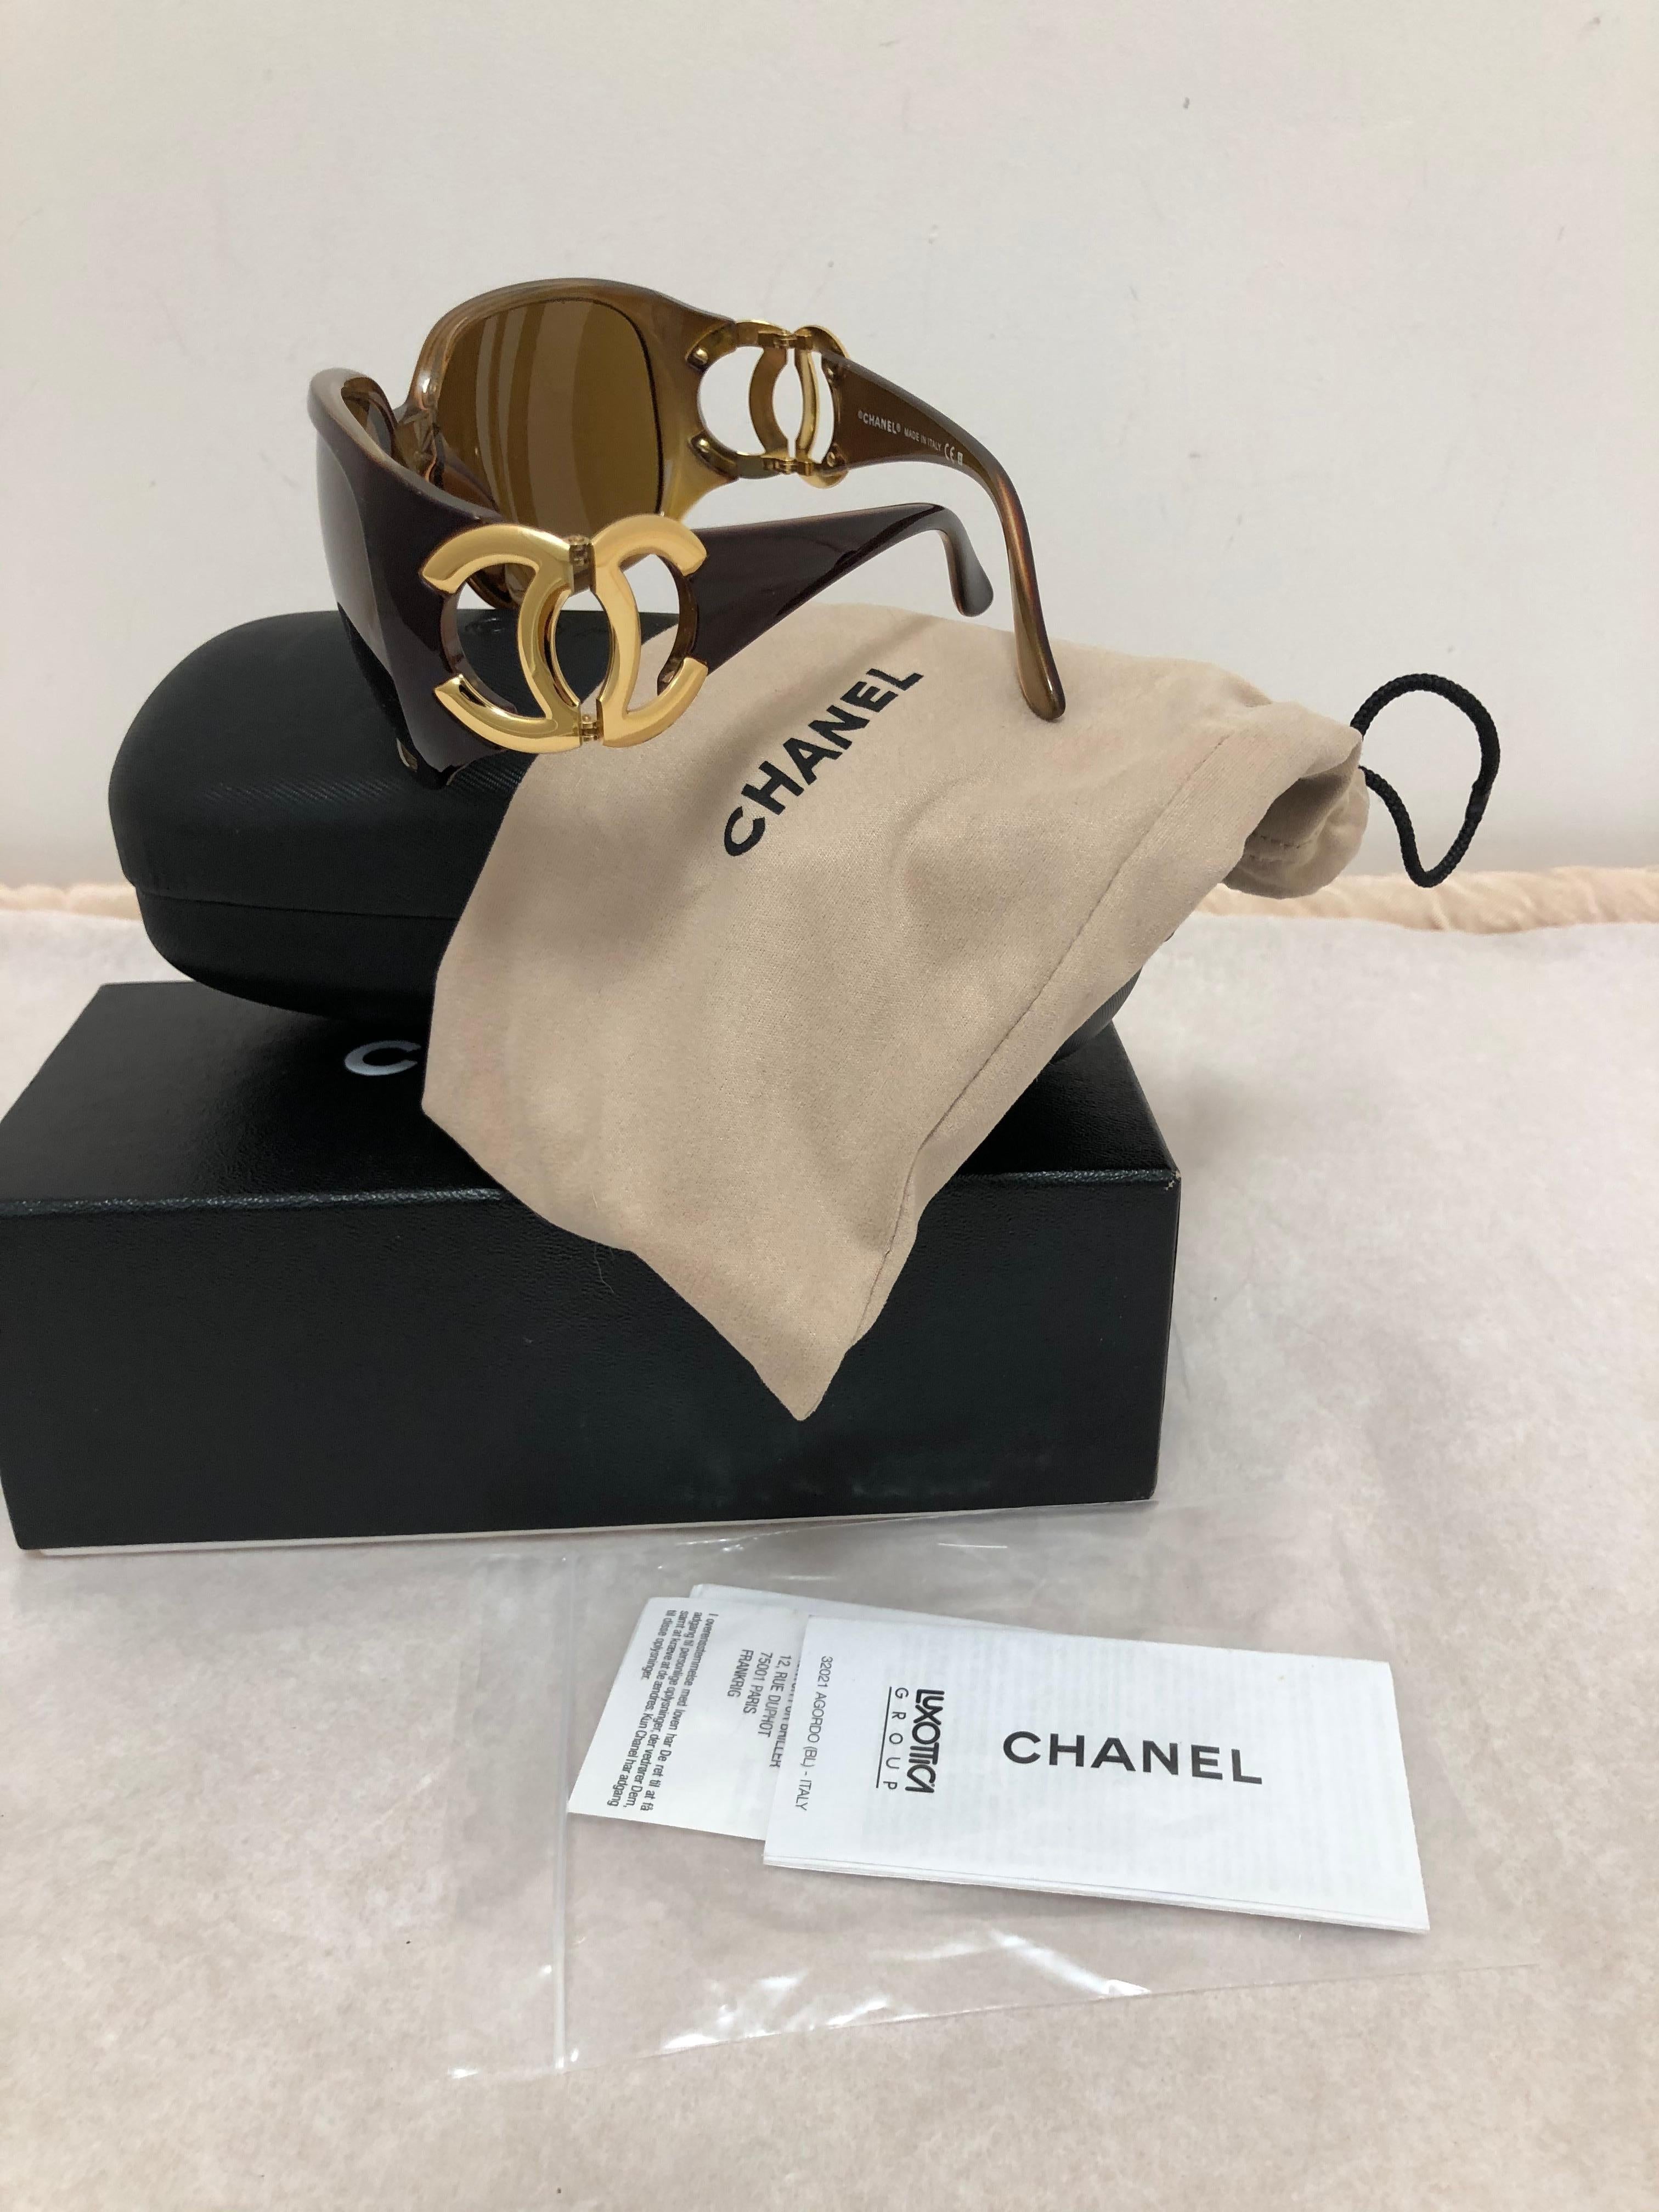 These Chanel sunglasses model # 6014 C.808/73 come with the full kit ie. box, case, dustbag and guarantees. The color is brown with some burgundy hints, and the arms have big CC goldtone logos. I believe these are 